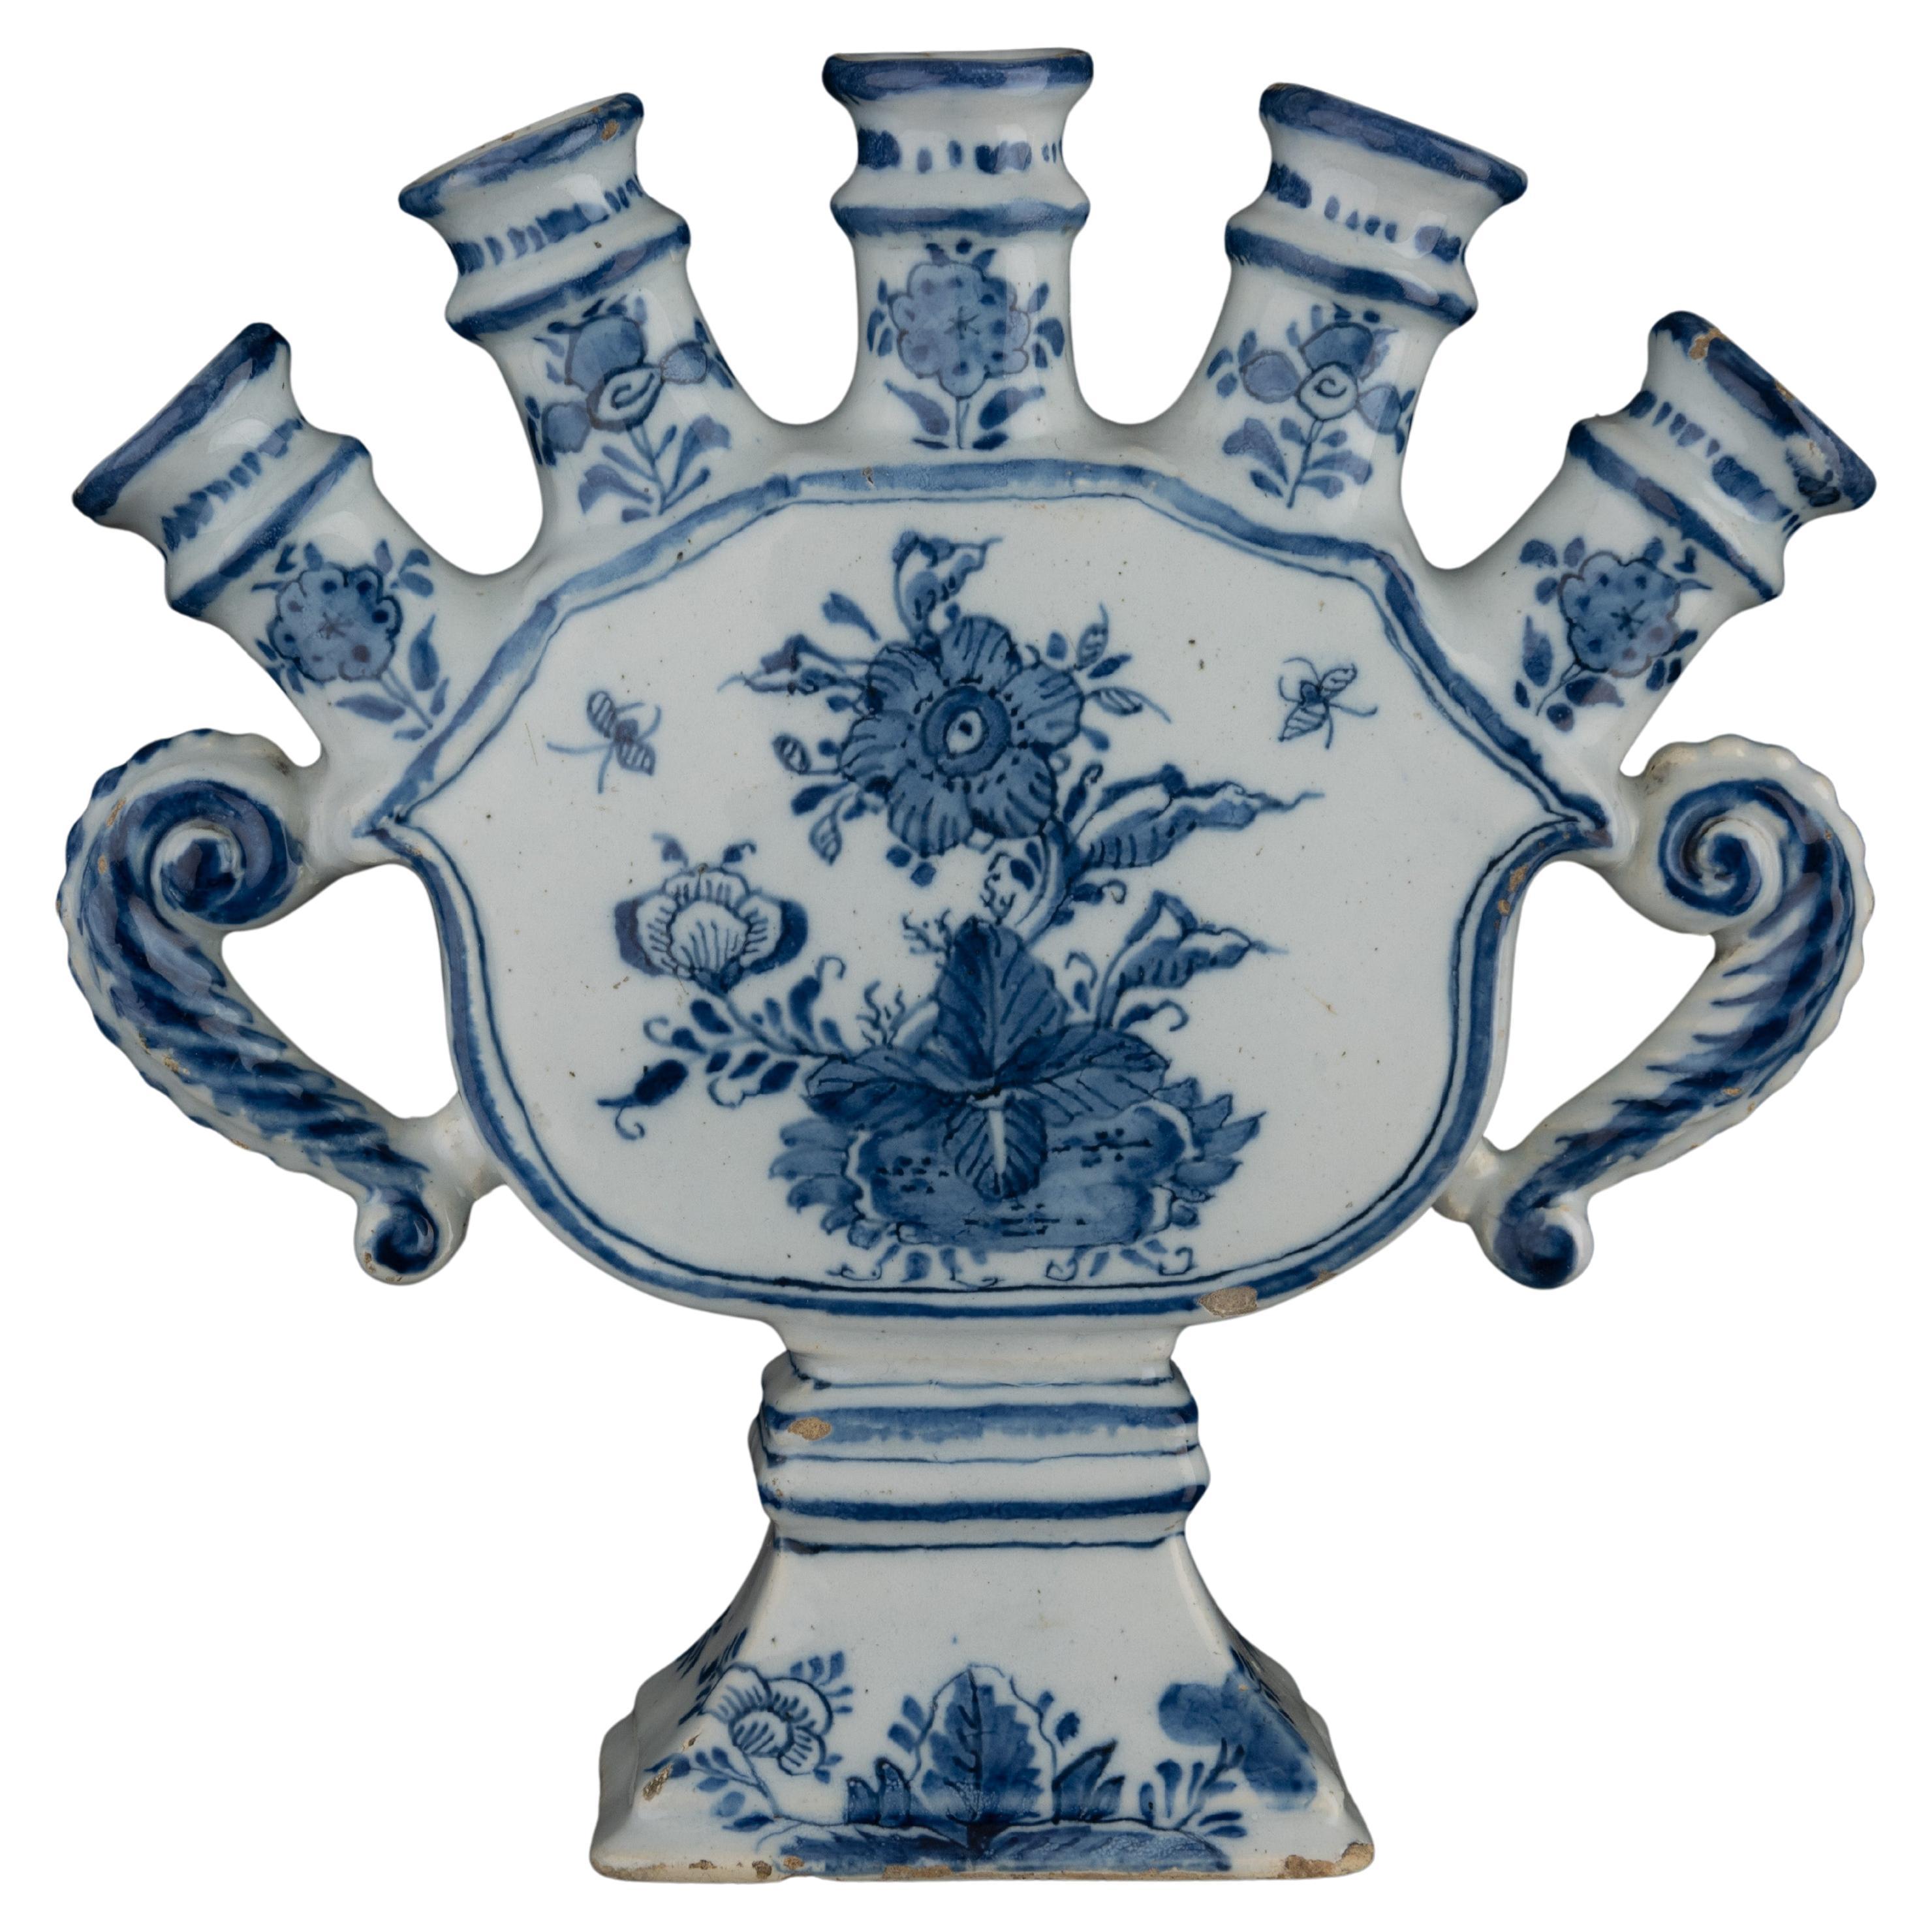 What are the Dutch blue and white ceramic pieces called?